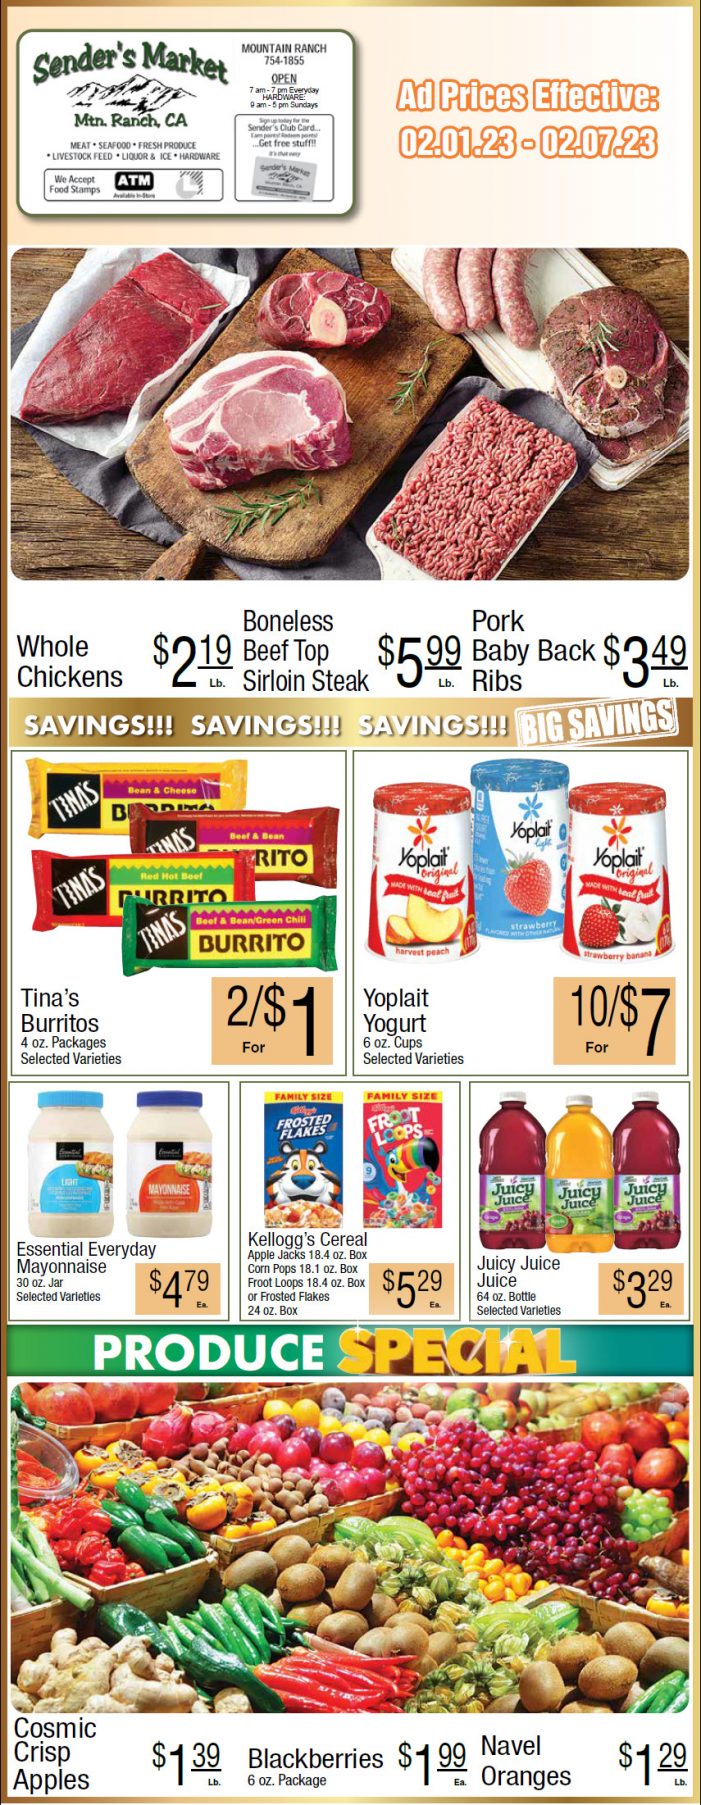 Sender’s Market Weekly Ad & Grocery Specials February 1st – 7th! Shop Local & Save!!